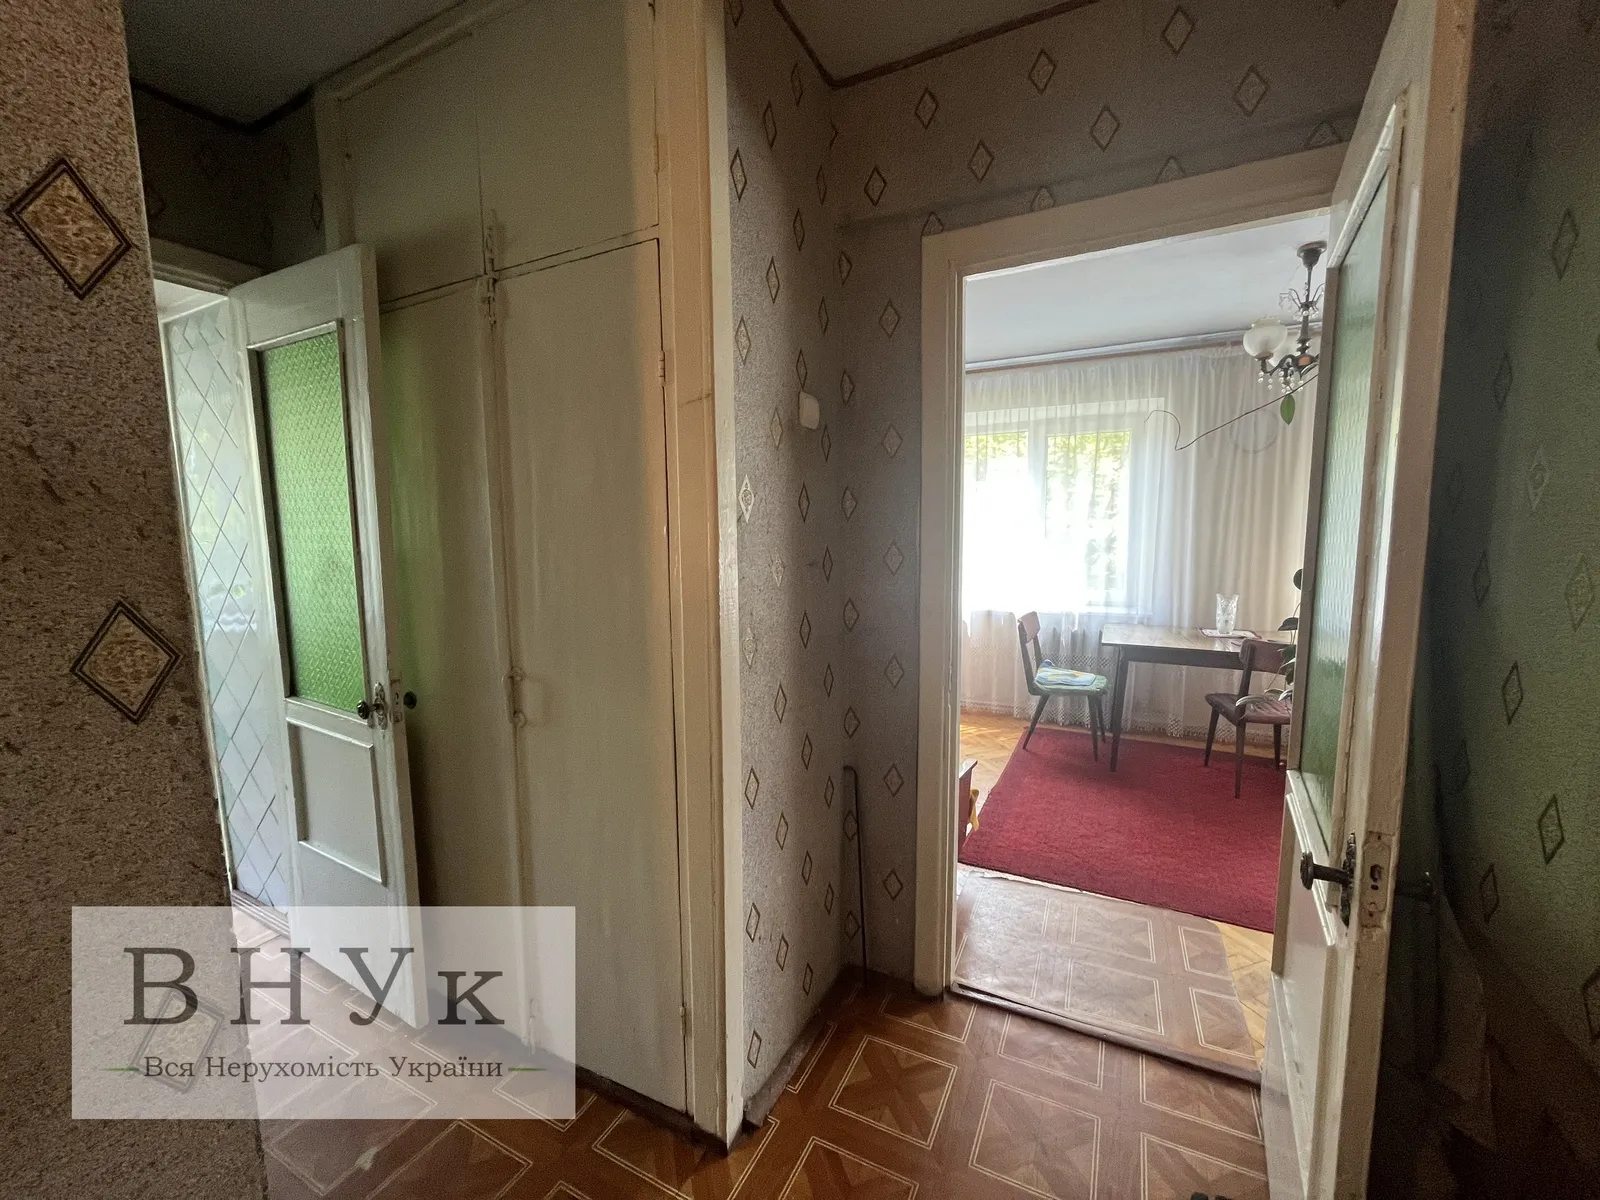 Apartments for sale. 3 rooms, 504 m², 4th floor/5 floors. Lesi Ukrayinky vul., Ternopil. 